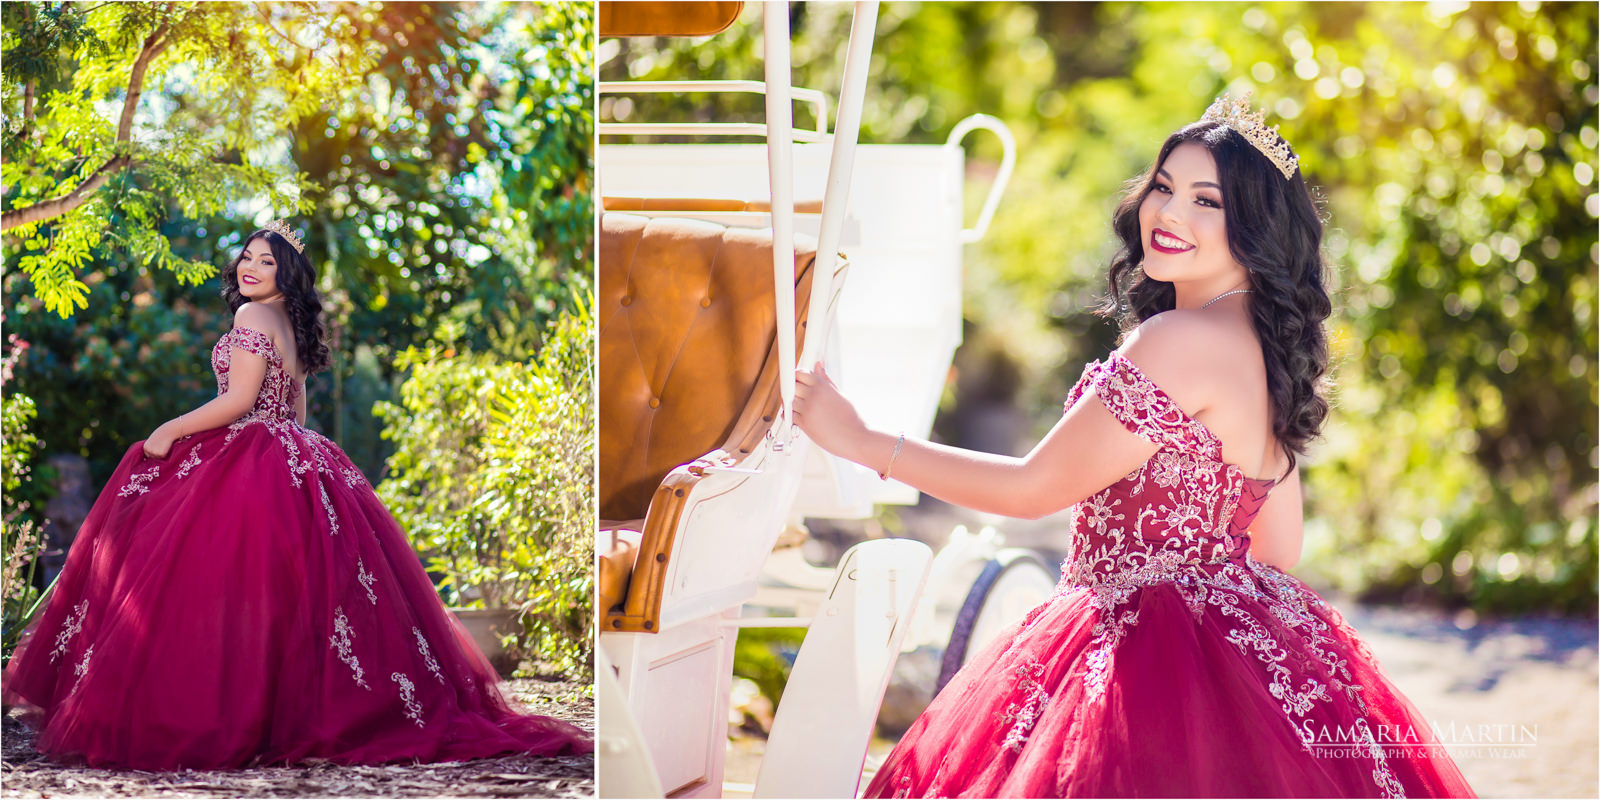 Sweet 16 Photos | SAMARIA MARTIN QUINCEANERA PHOTOGRAPHY AND DRESSES